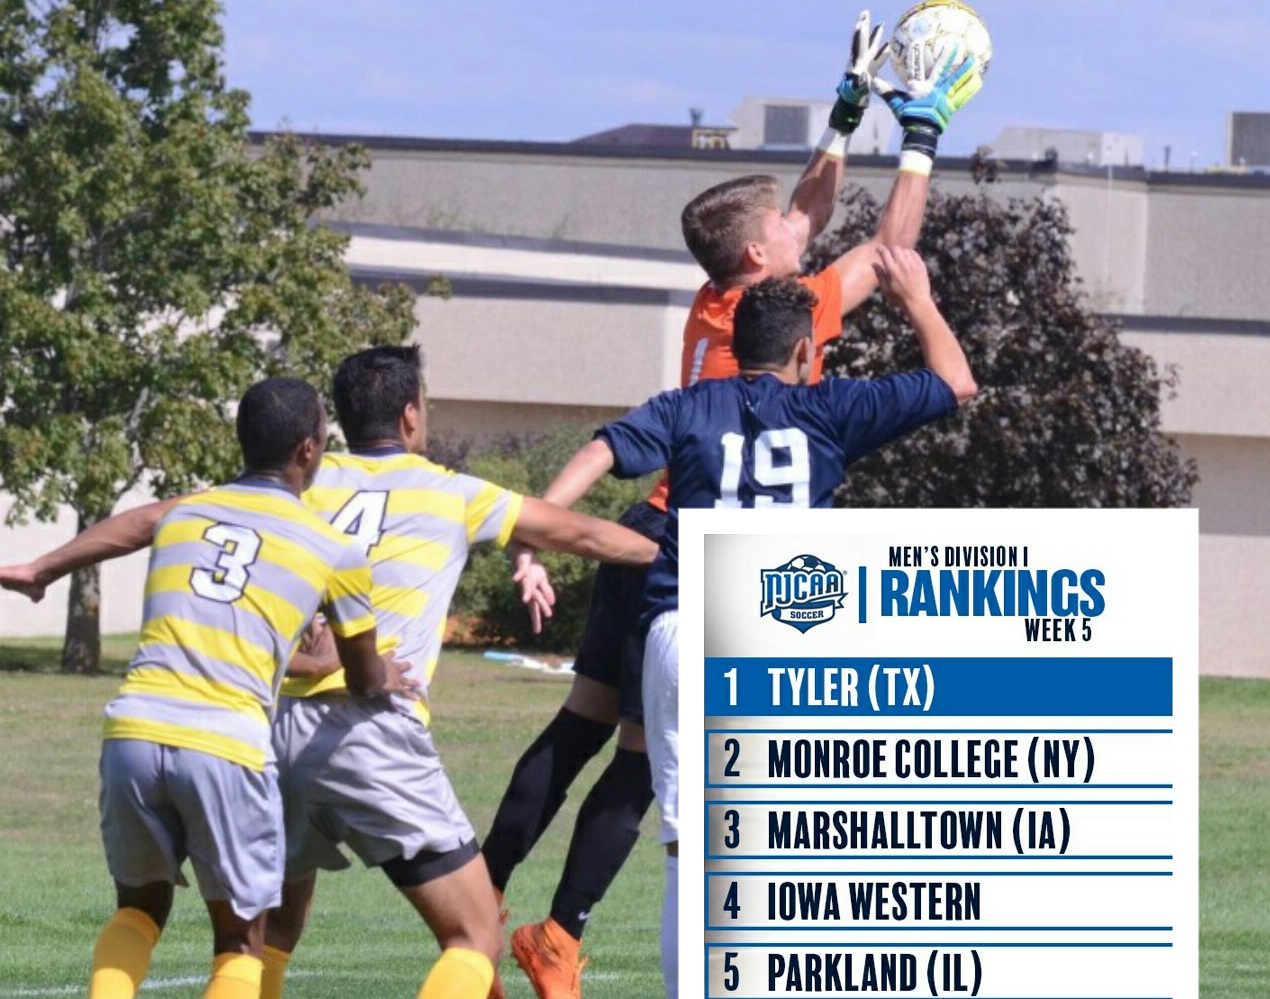 Tigers soar to No. 3 in NJCAA Division I rankings